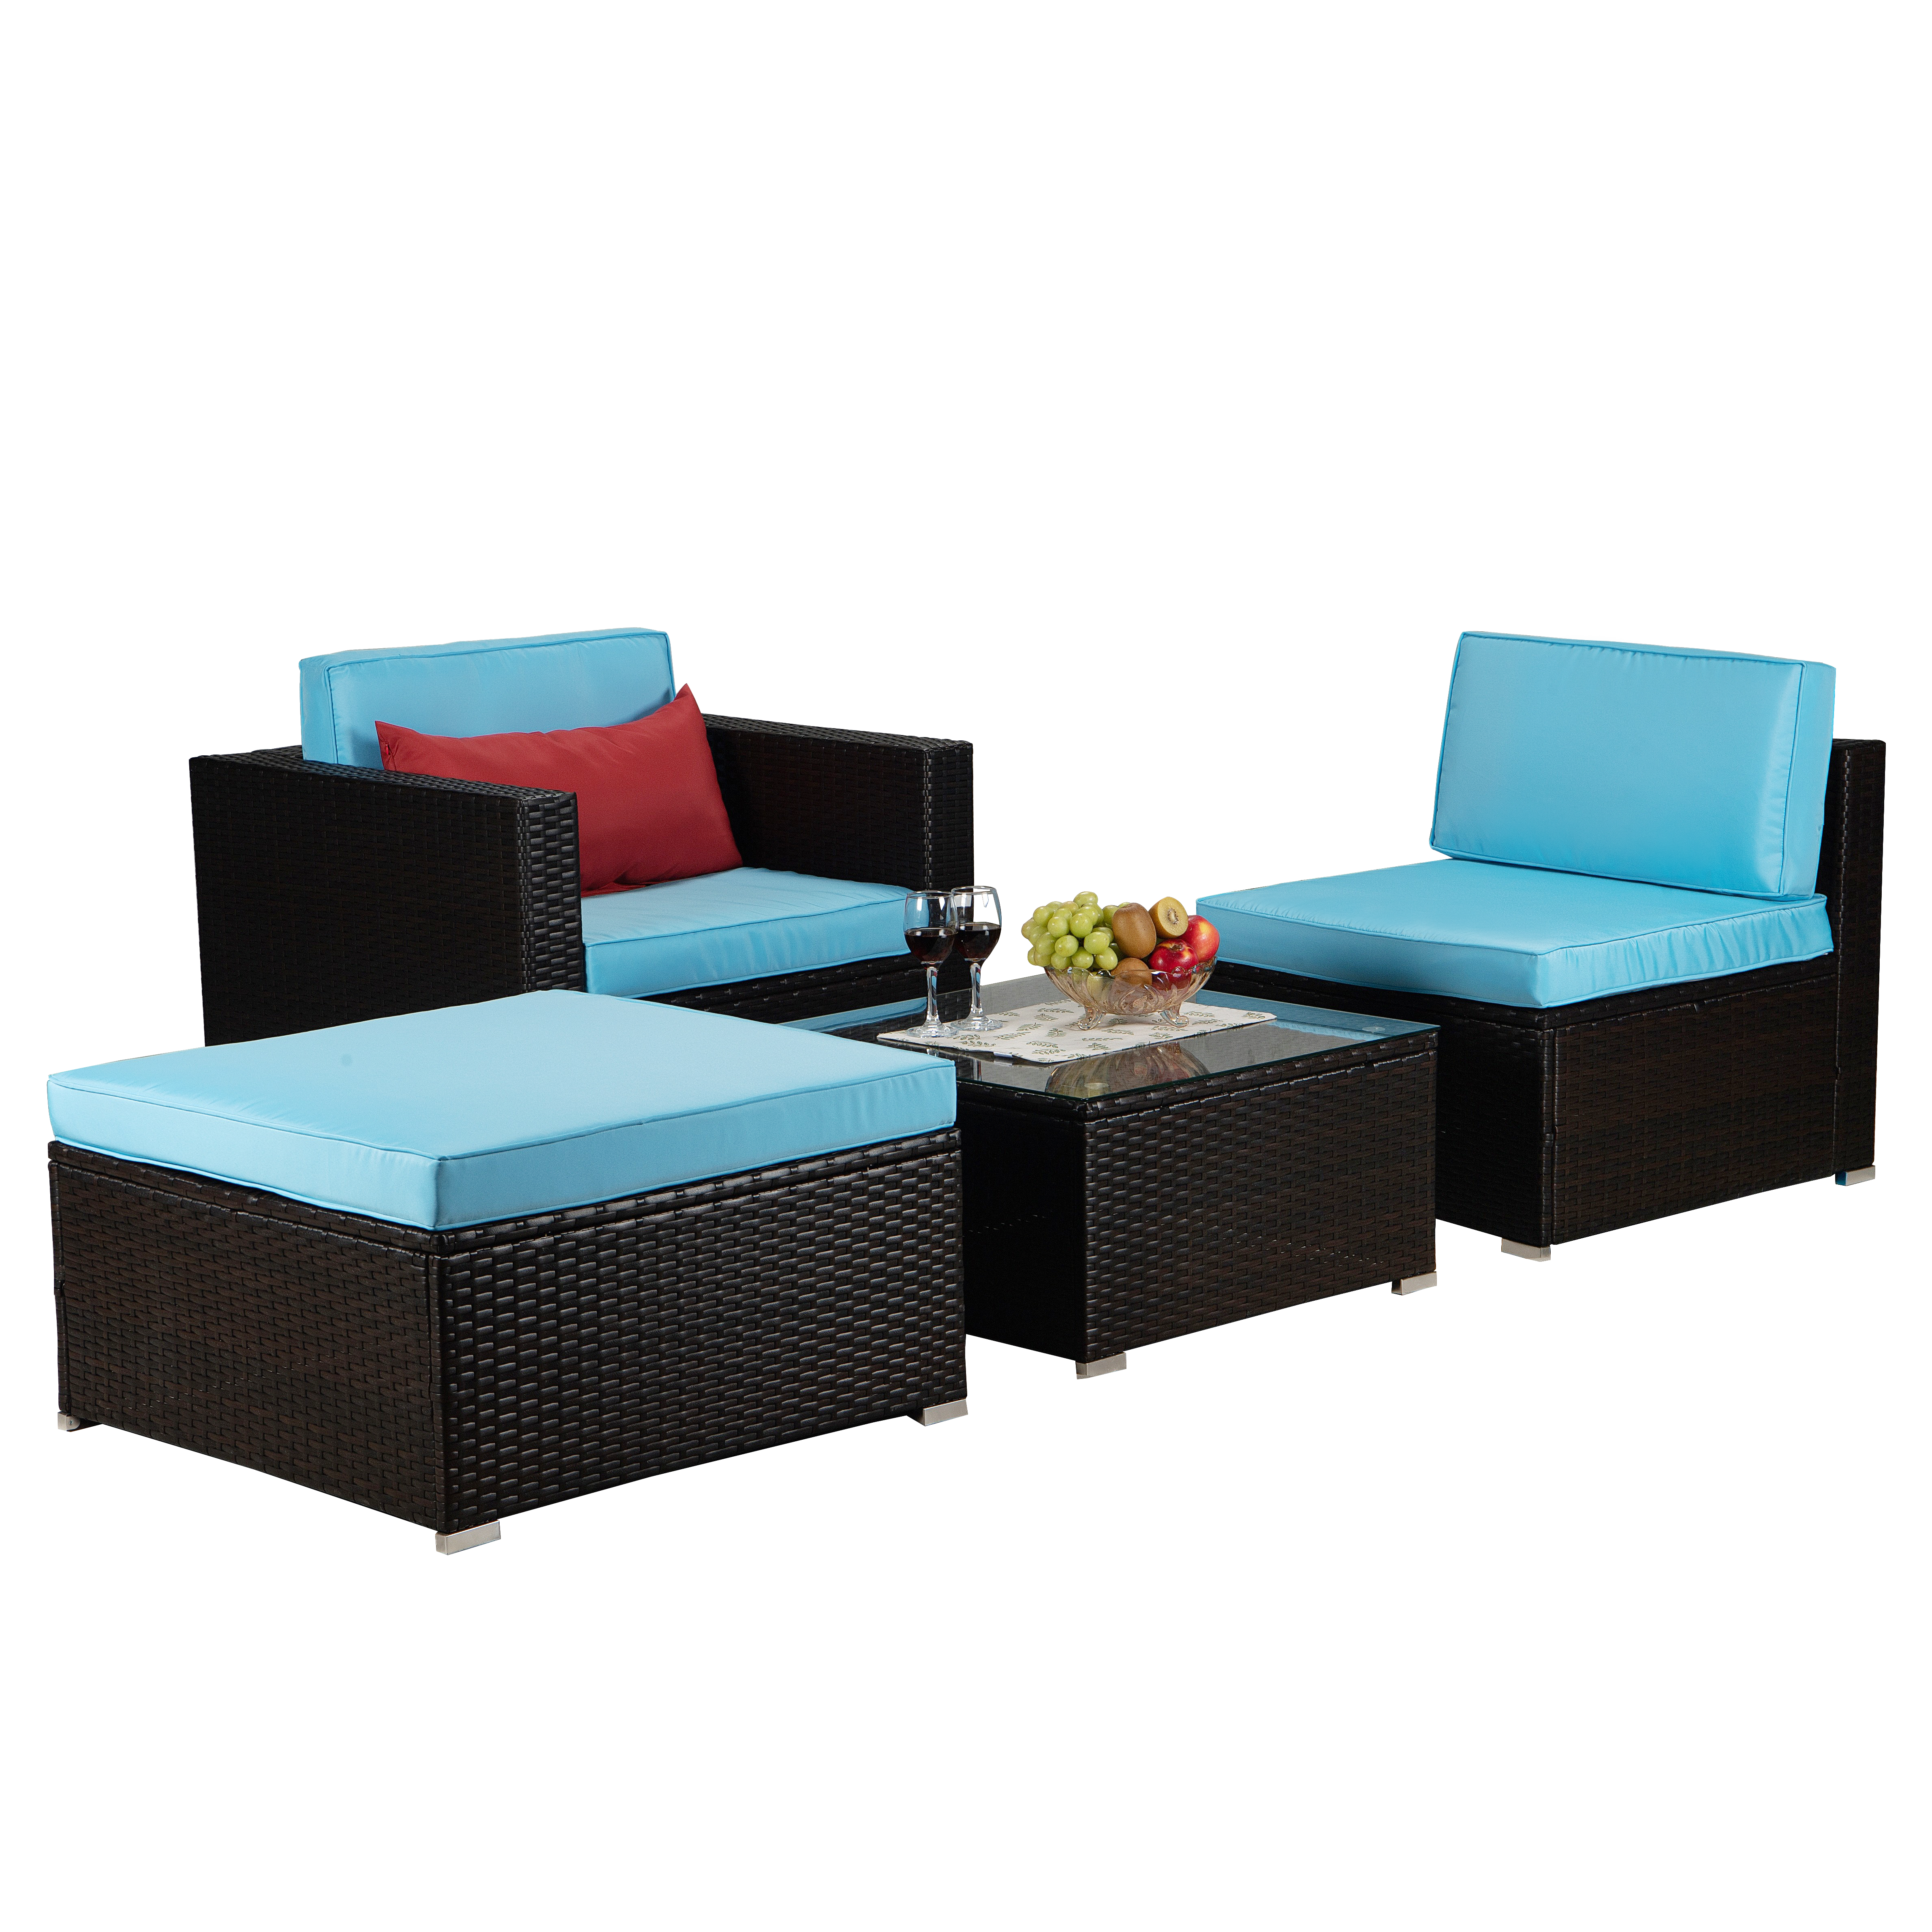 Beefurni Outdoor Garden Patio Furniture 4-Piece Brown PE Rattan Wicker Sectional Blue Cushioned Sofa Sets with 1 Red Pillow-Boyel Living